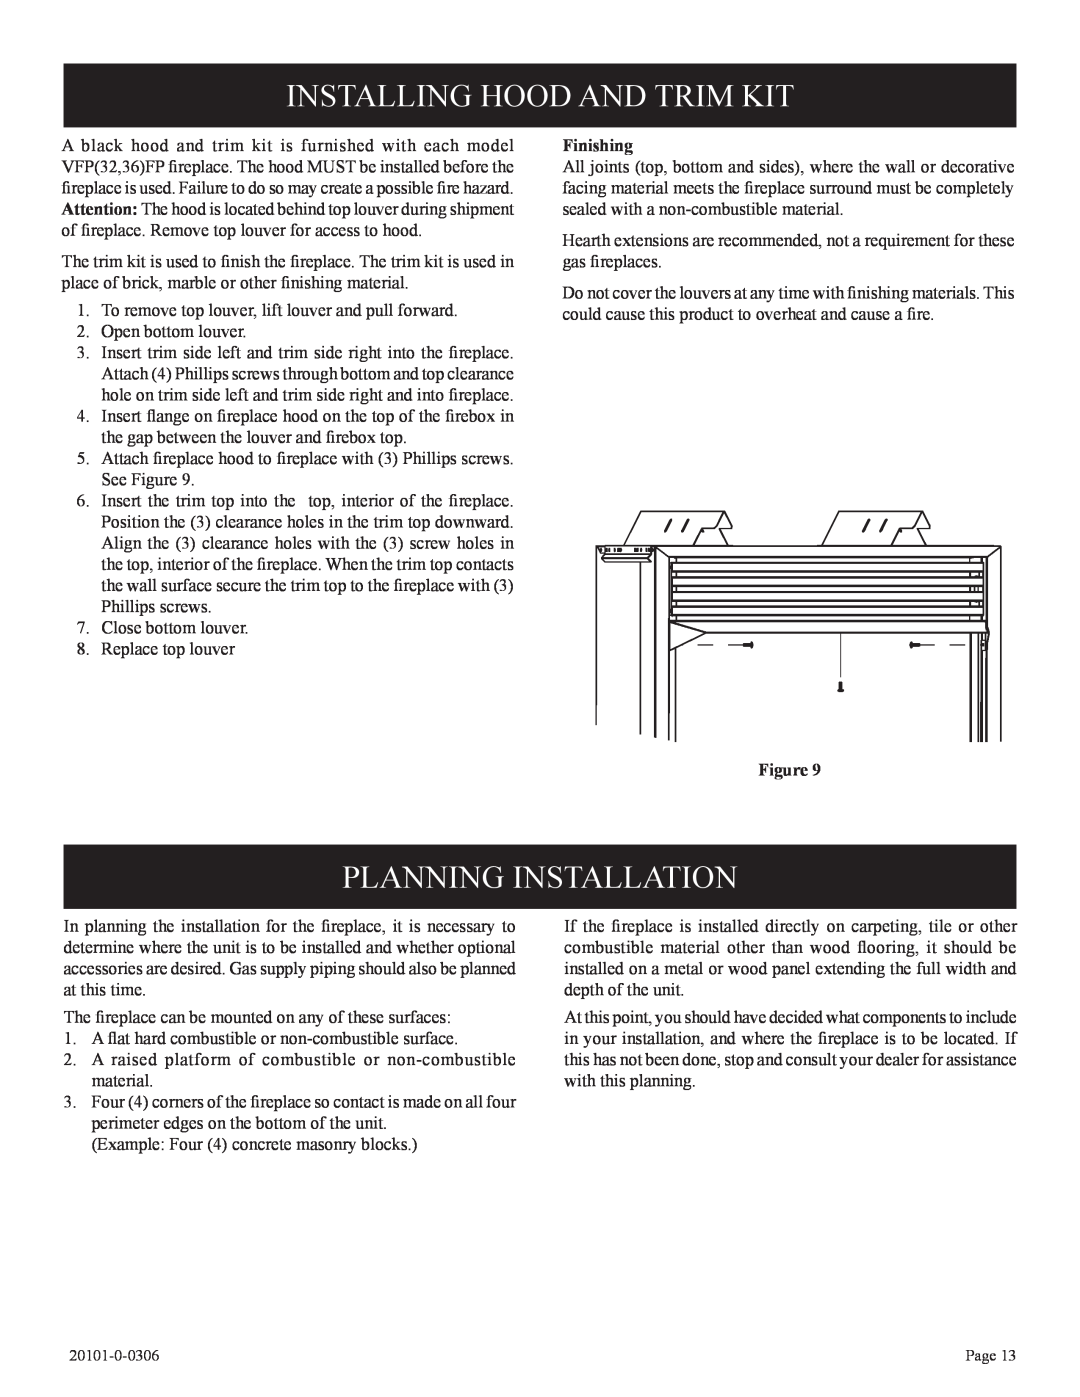 Empire Comfort Systems P)-1, VFP36FP, VFP32FP, 31)L(N, 21)L(N Installing Hood And Trim Kit, Planning Installation, Finishing 